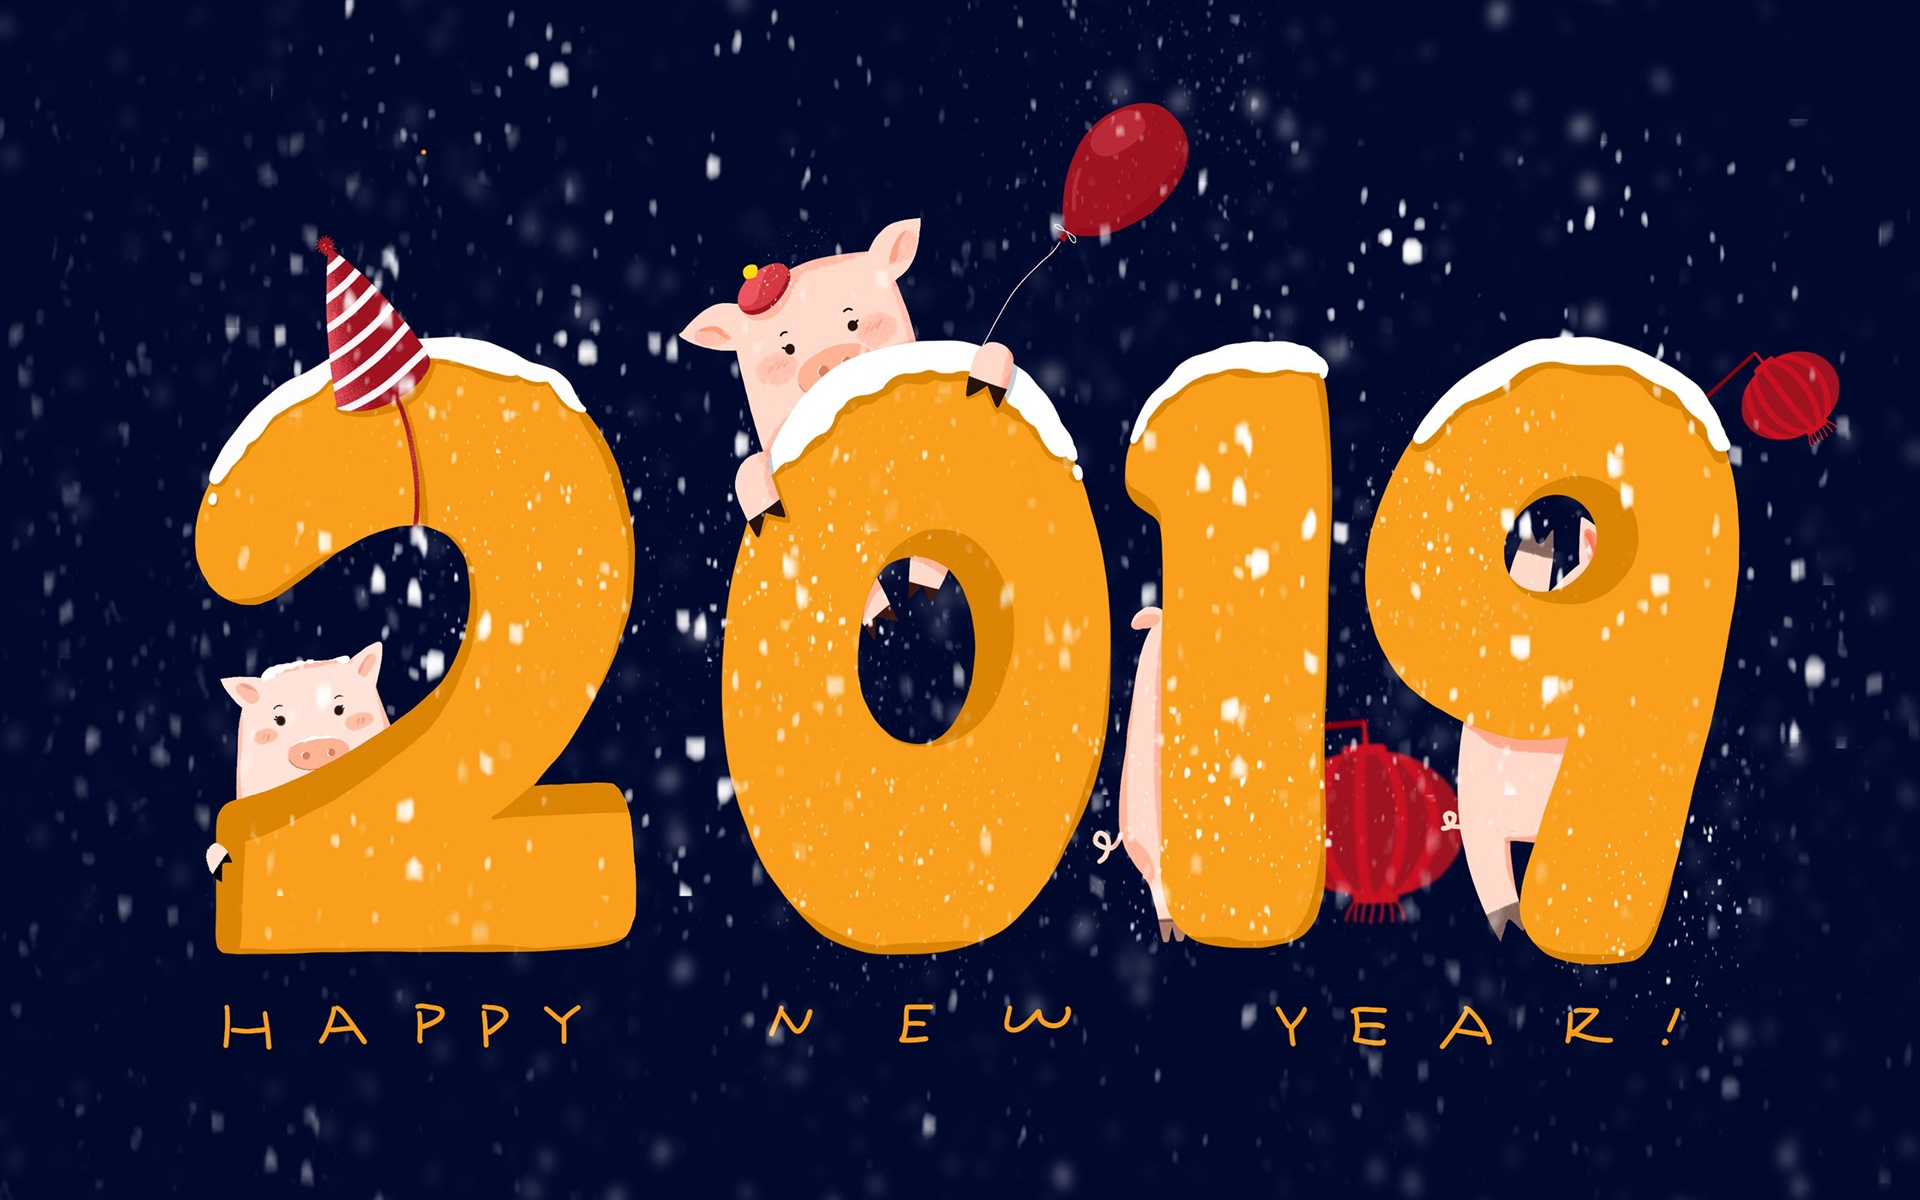 Happy New Year 2019 HD wallpapers #18 - 1920x1200